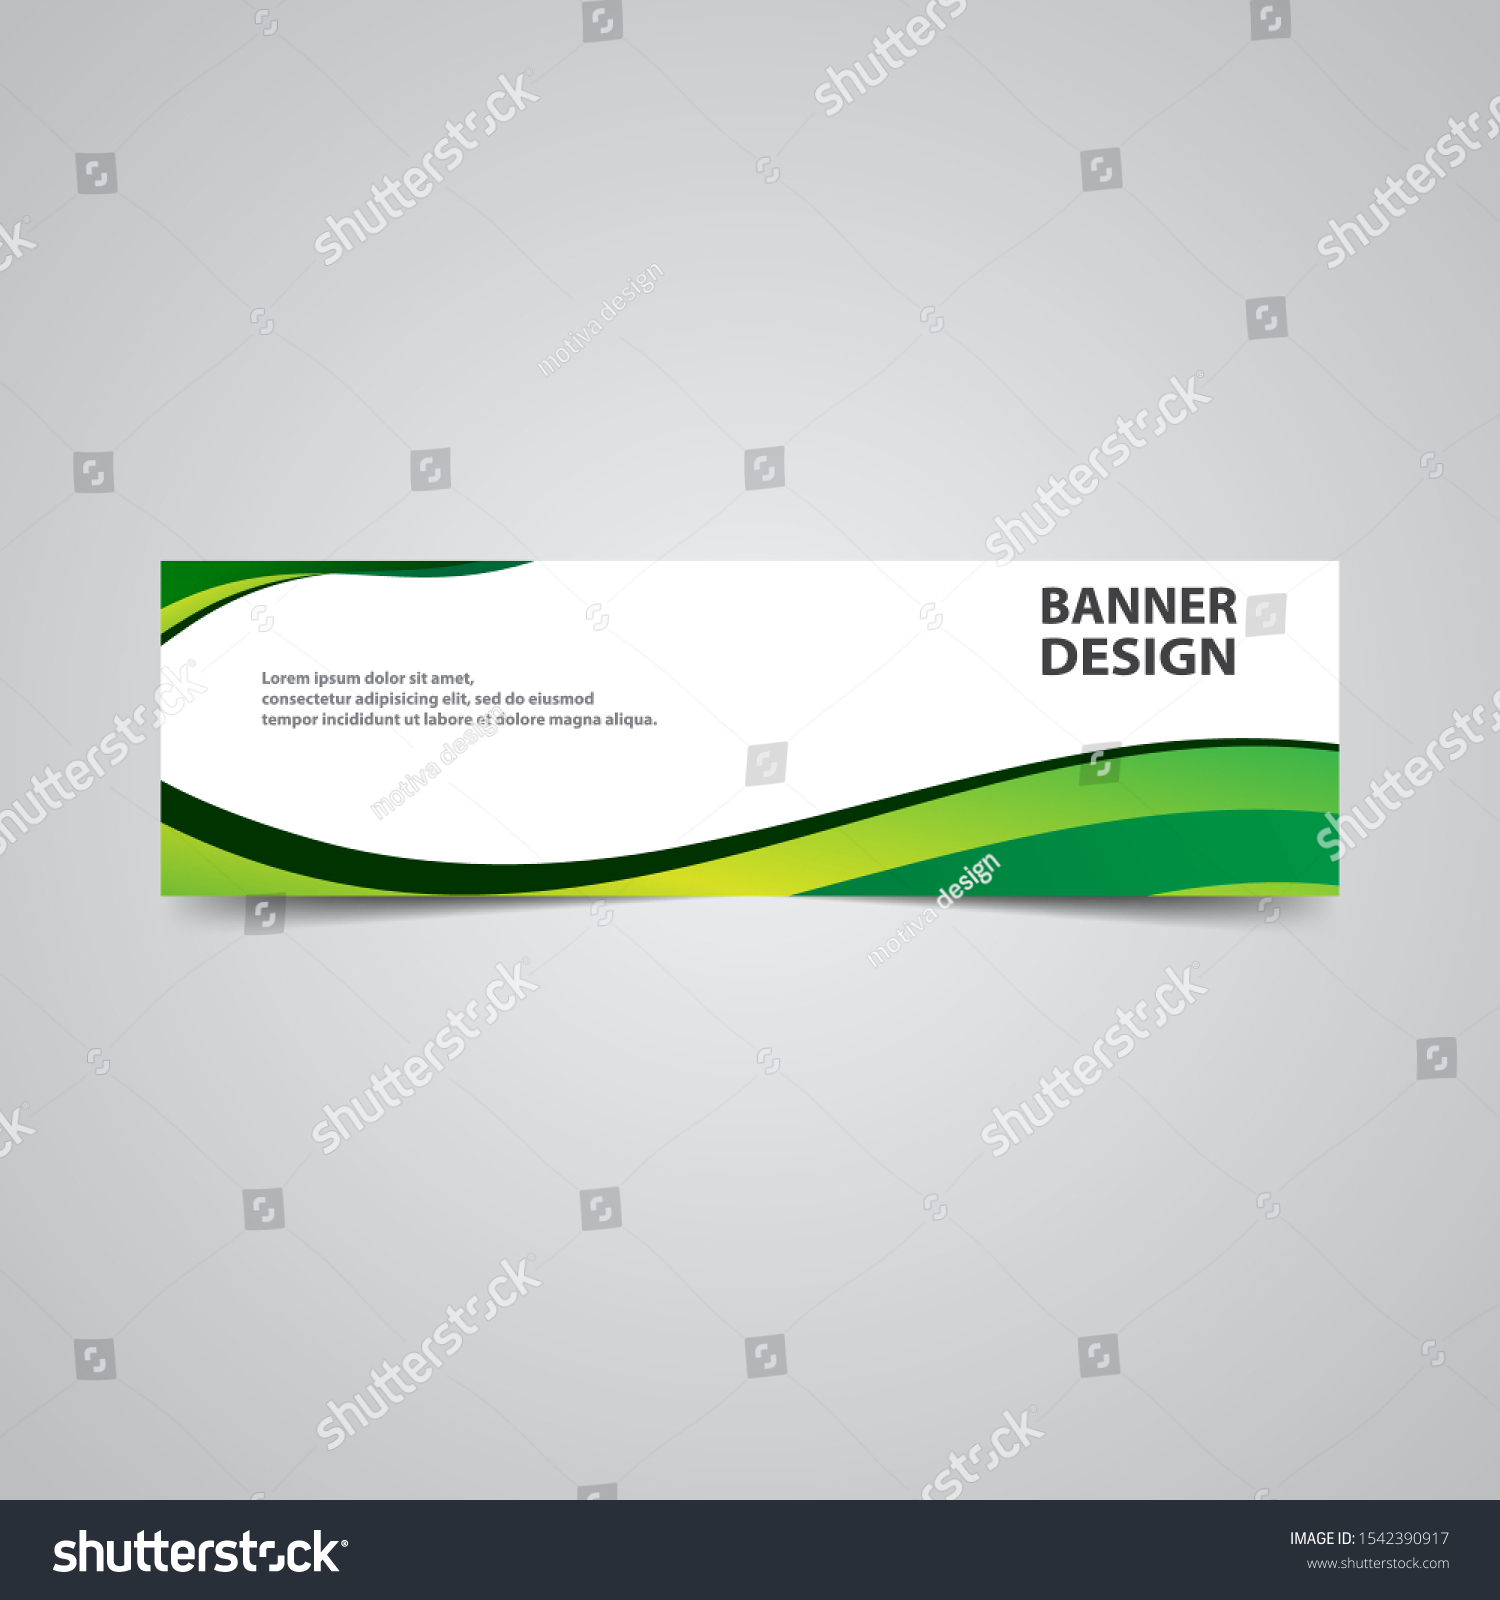 Simple Banner Design Abstract Banner Template Stock Vector (Royalty